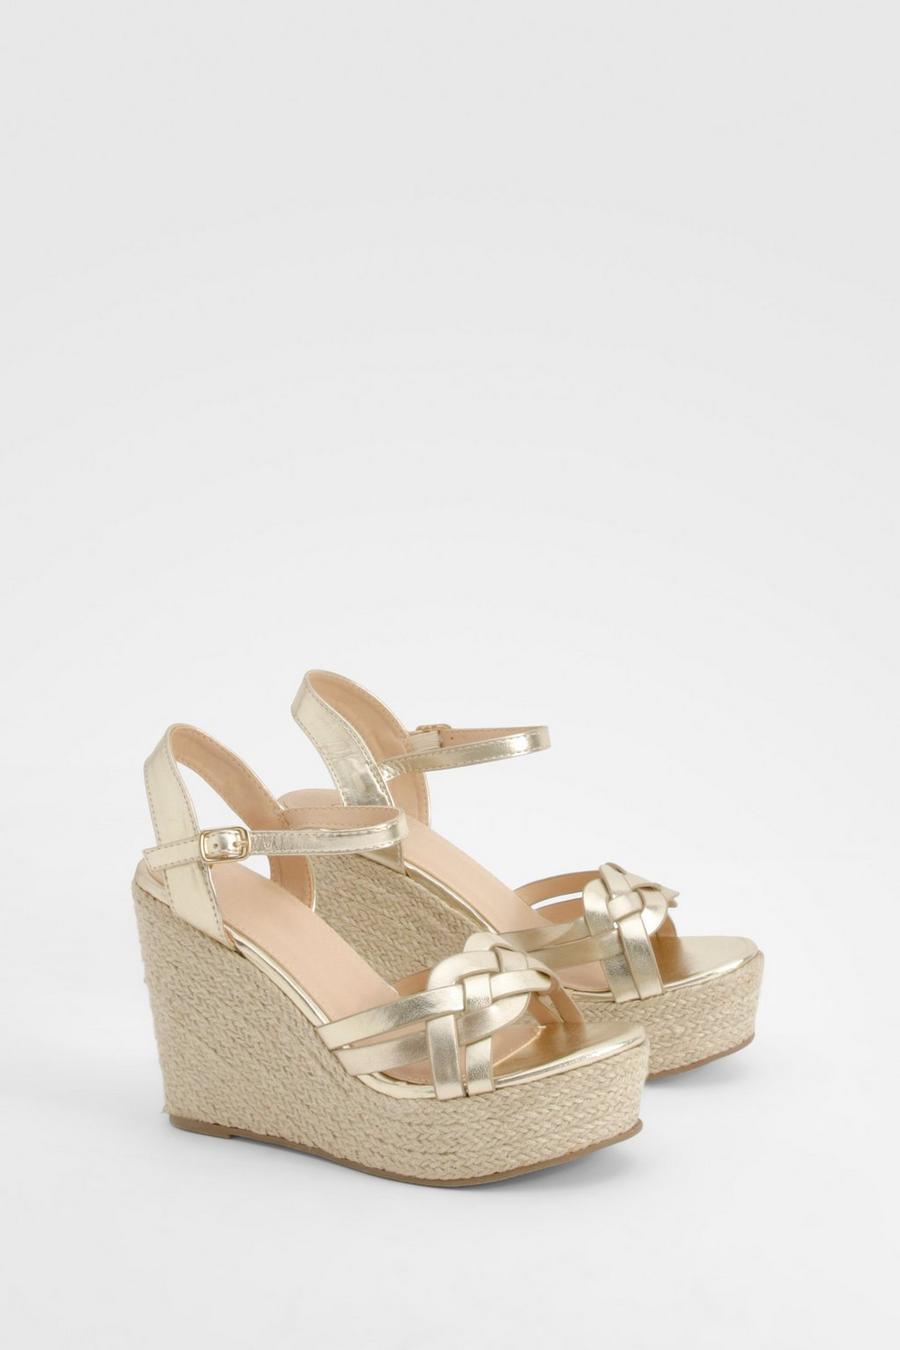 Gold Metallic Woven Front Espadrille Wedges